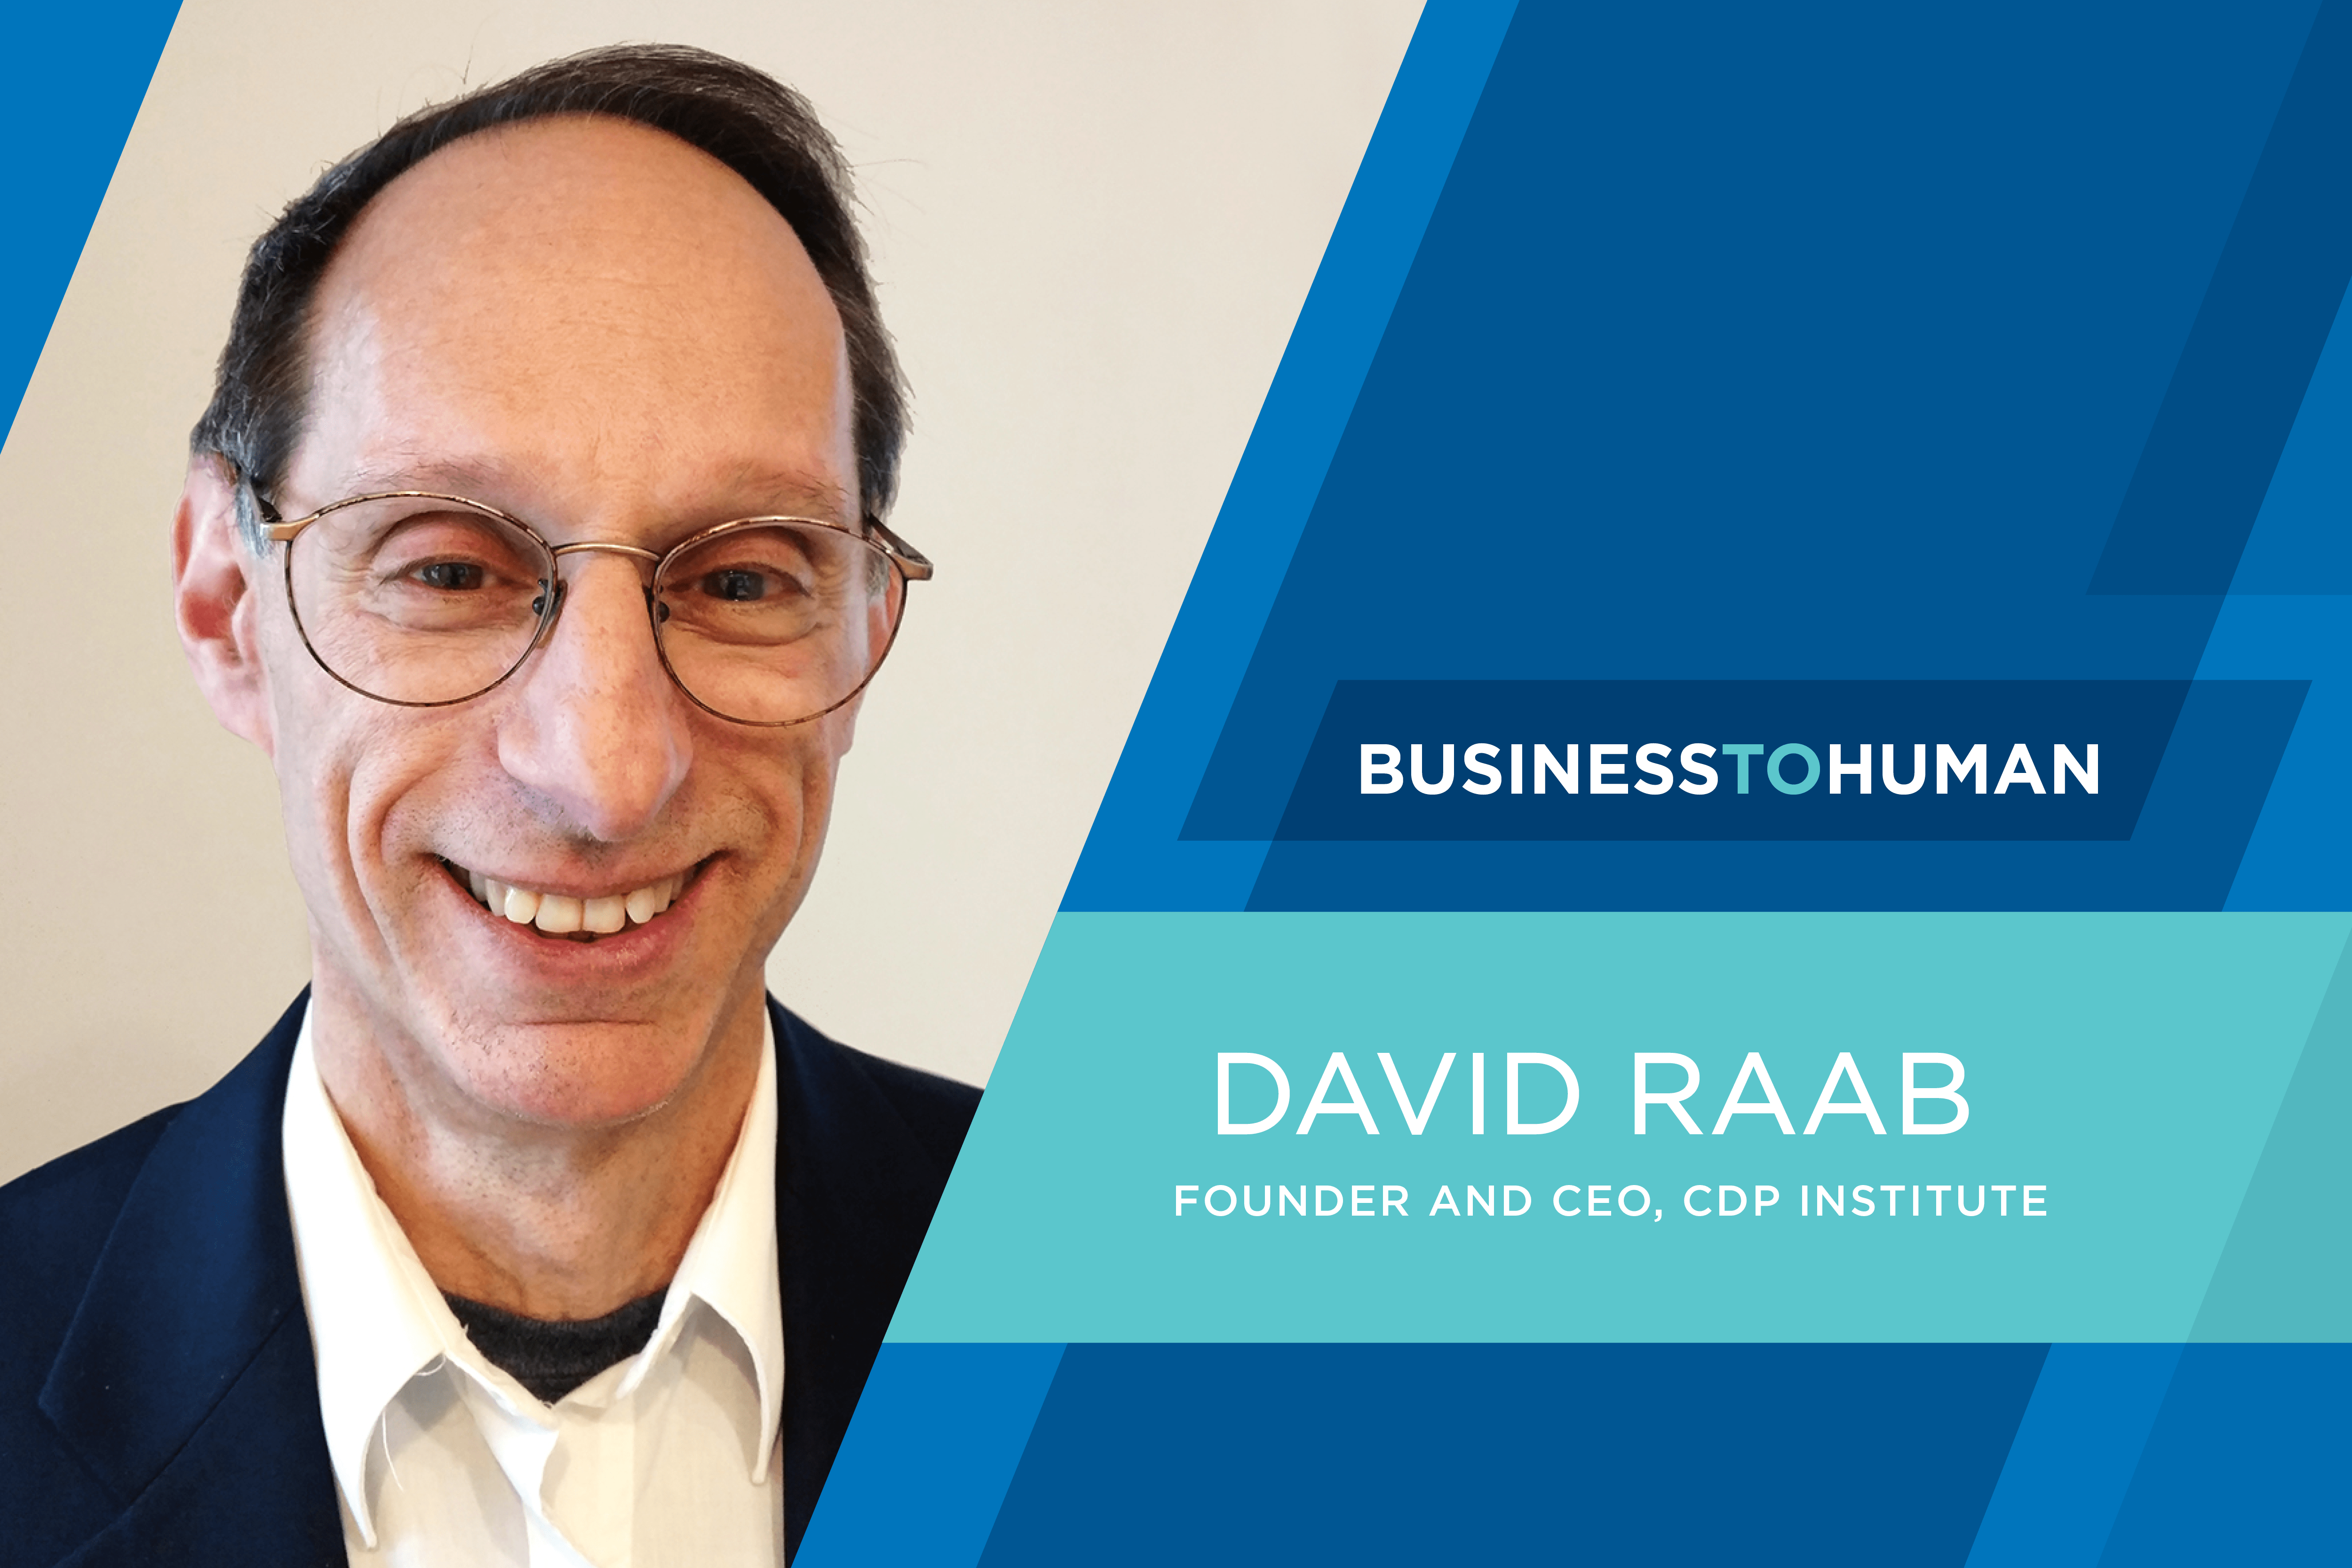 David Raab, Founder and CEO of the CDP Institute